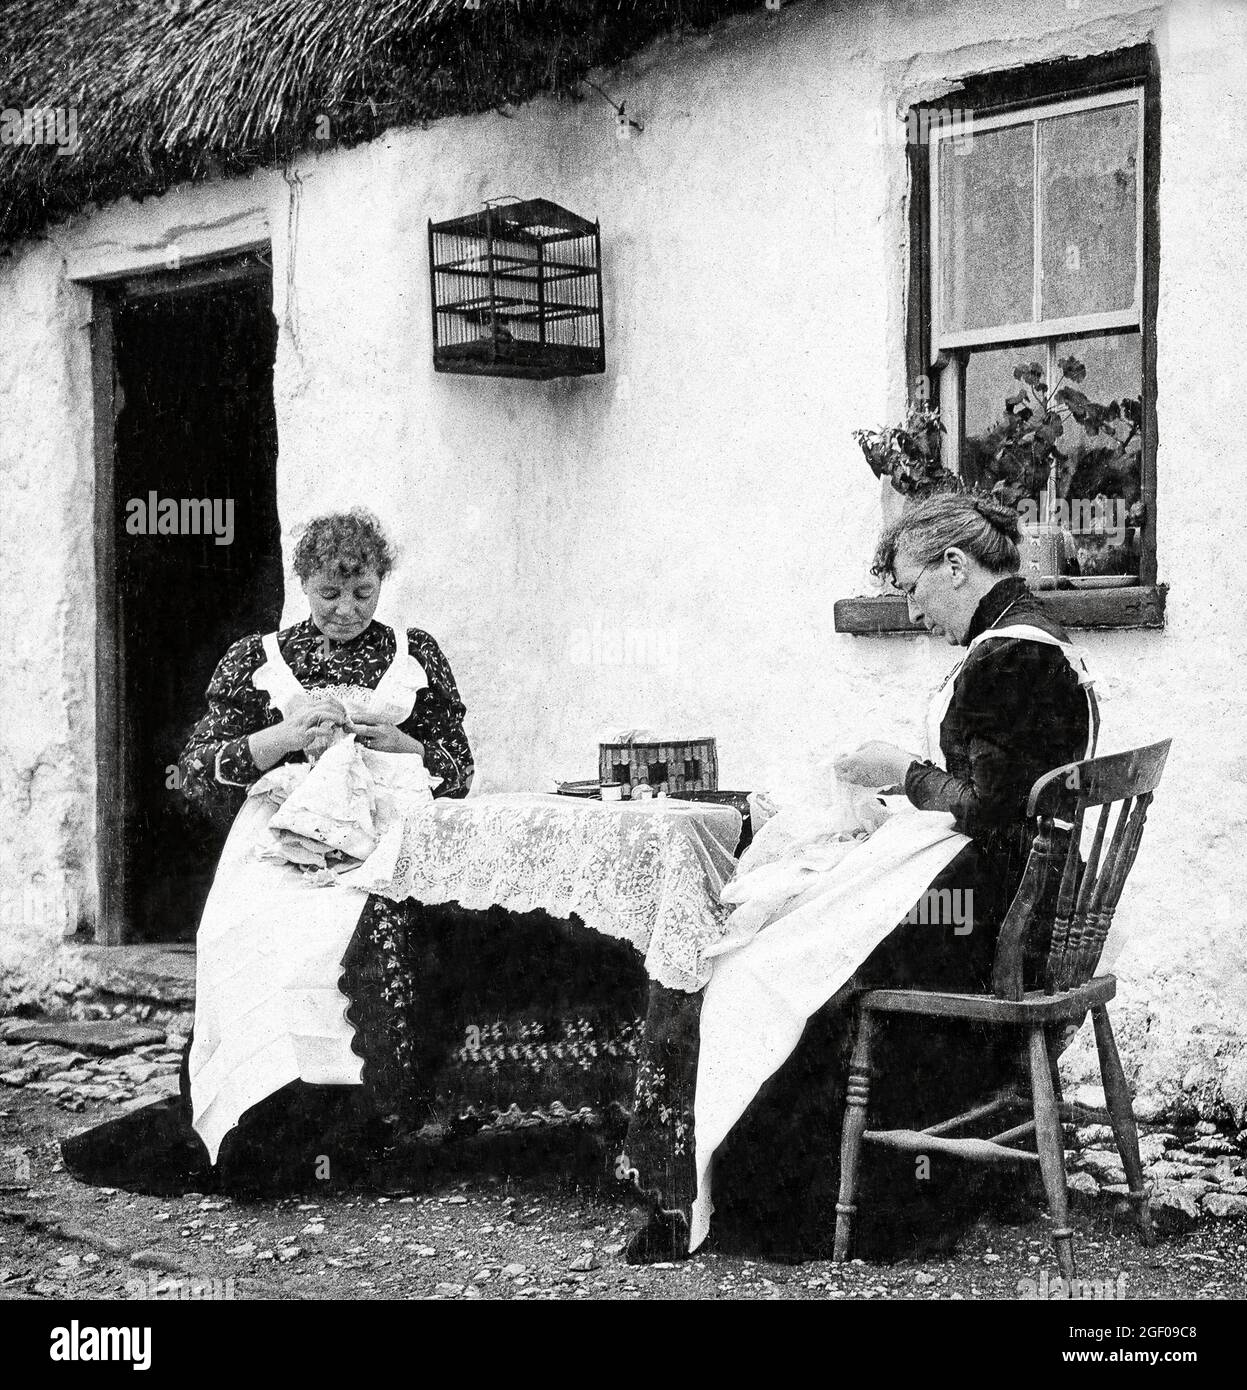 An early 20th century scene of two women making Carrickmacross Lace outside their thatched cottage in County Monaghan. It was introduced into Ireland in about 1820 by one Mrs Grey Porter of Donaghmoyne, who taught it to local women so that they could earn some extra money. Porter had been inspired by some examples of appliqué lace she had seen while on her honeymoon in Italy. Stock Photo